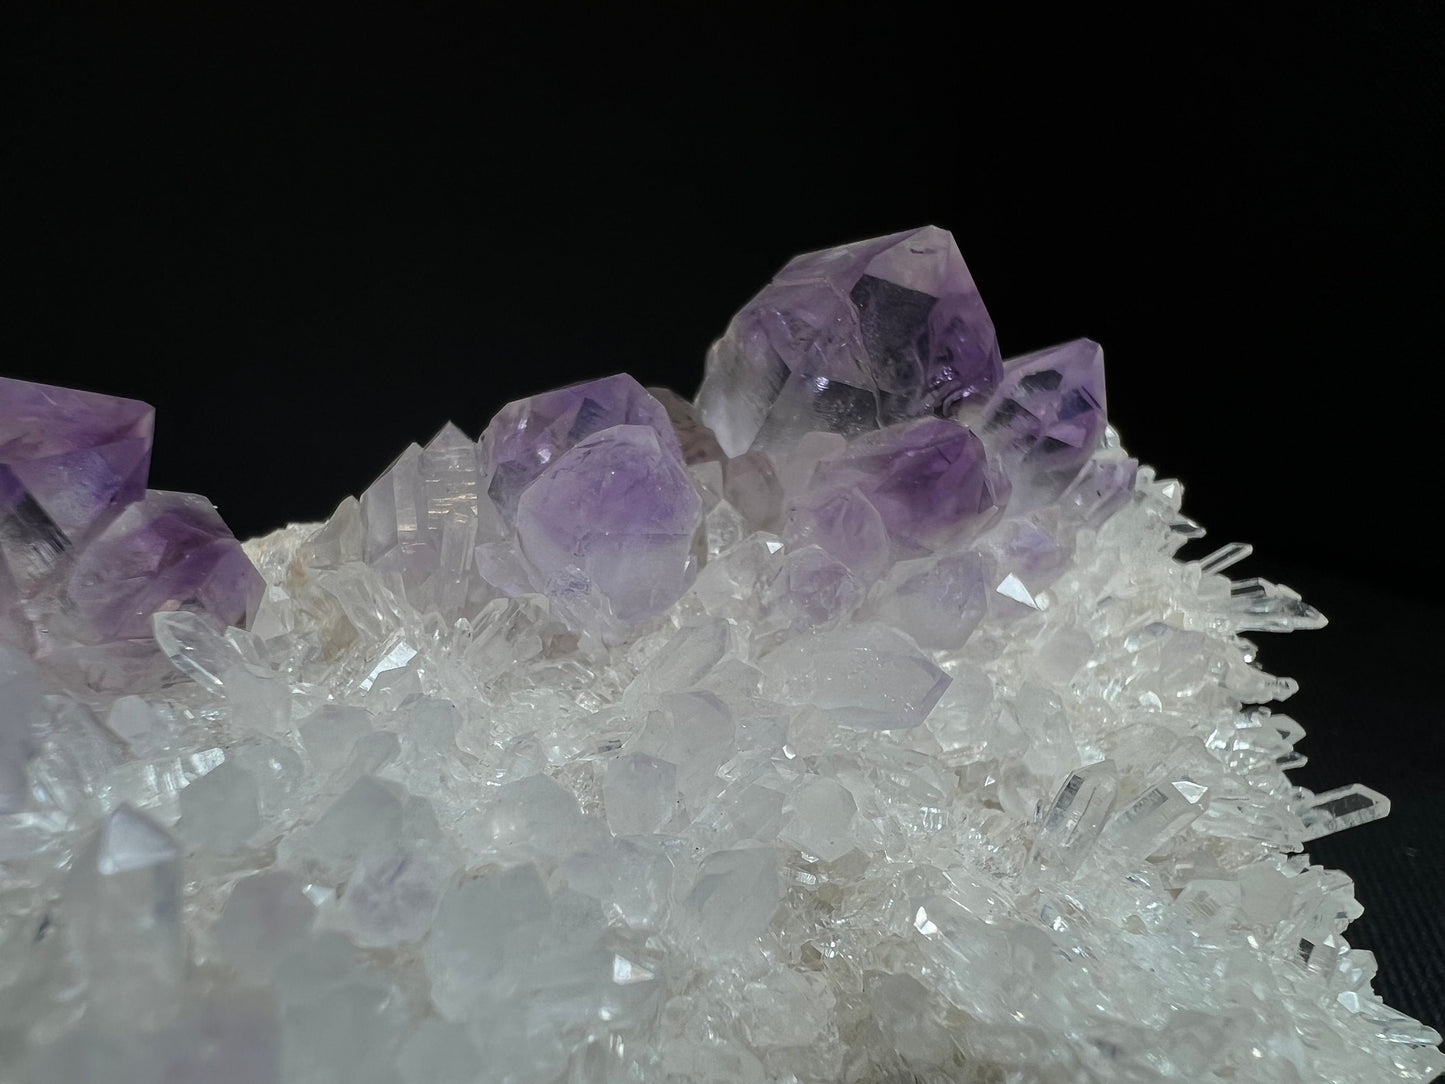 Amethyst From Jackson's Crossroads, Wilkes County, Georgia- Collectors Piece, Statement Piece